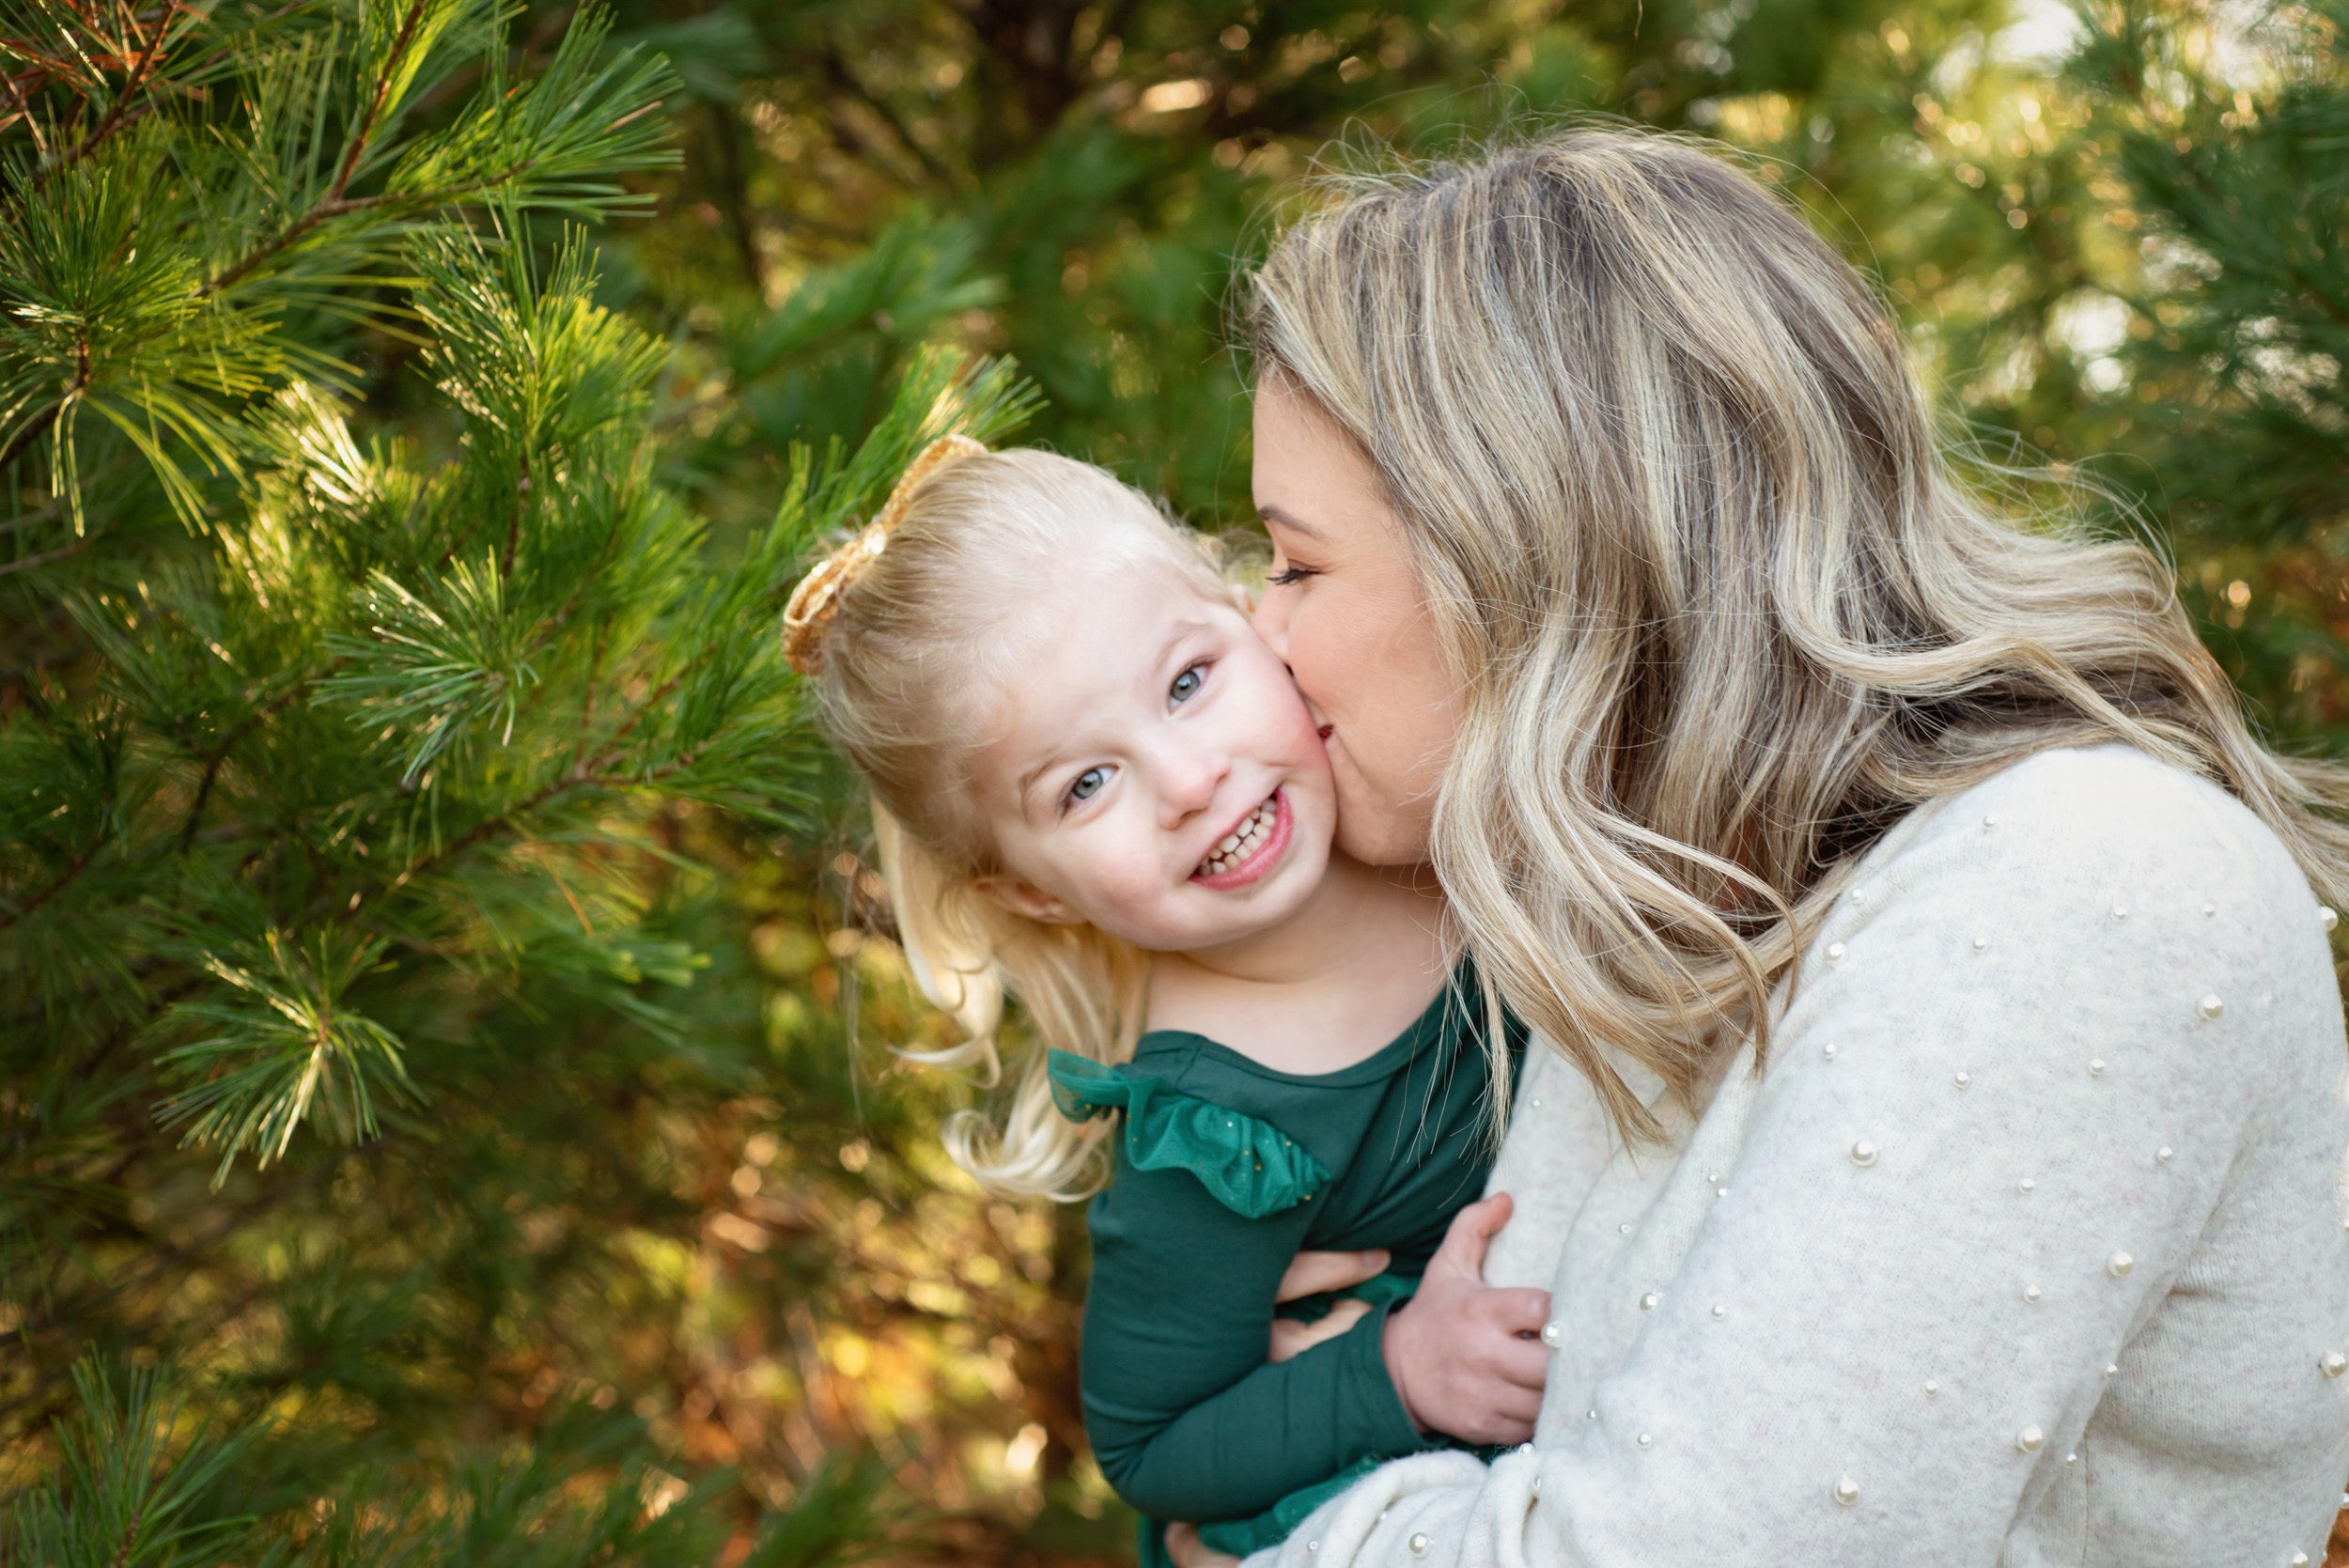 A young girl smiling at the camera while her mom hugs her and kisses her on the cheek at a family photoshoot